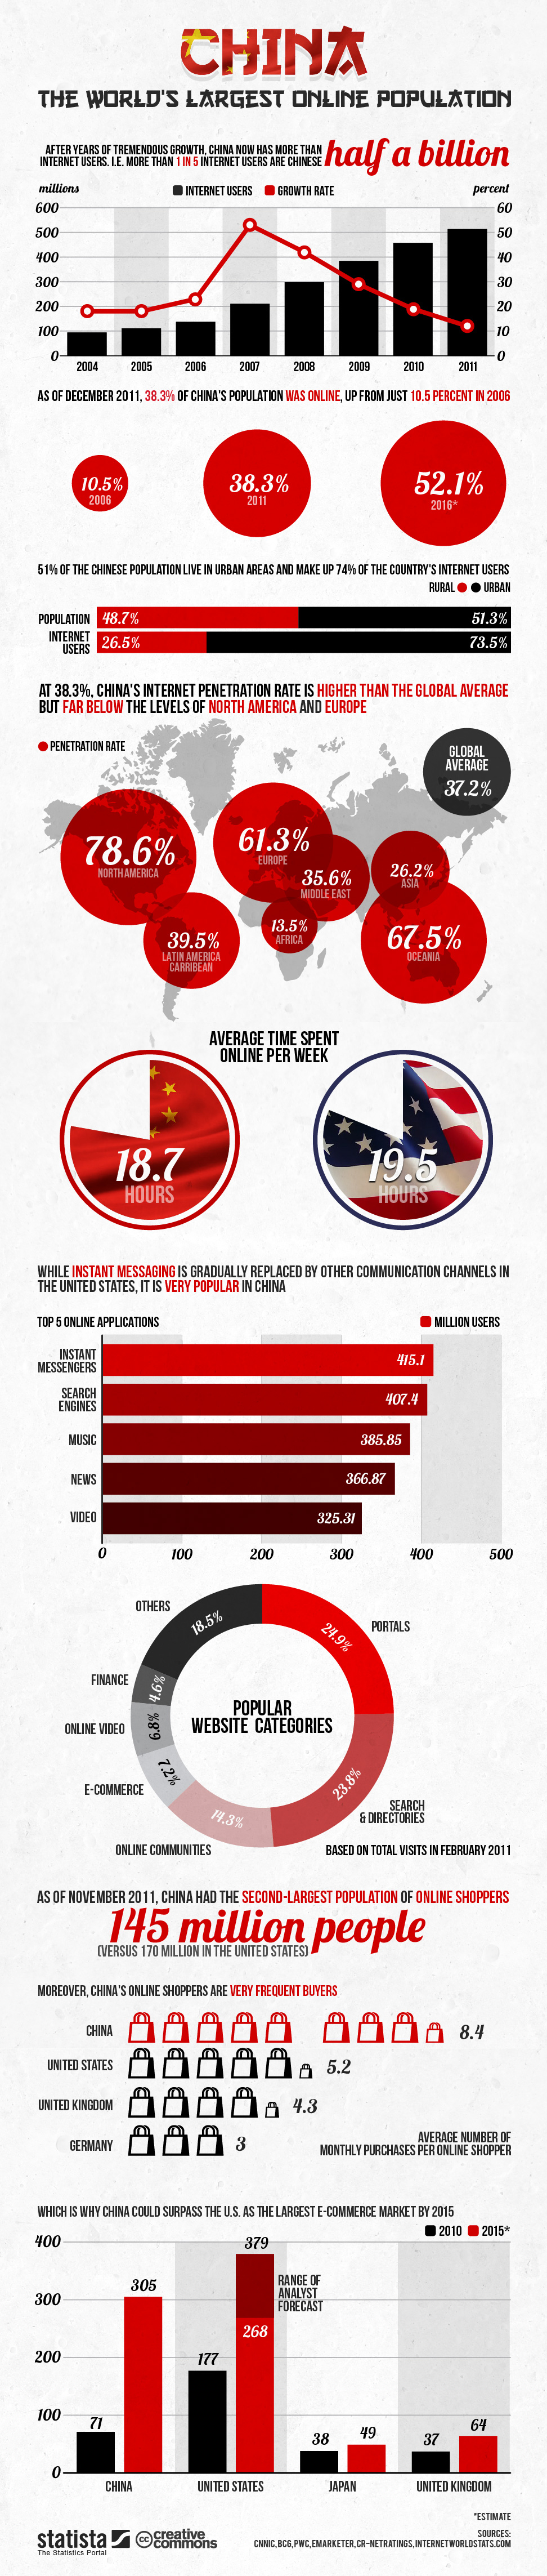 China: The World’s Largest Online Population [INFOGRAPHIC]